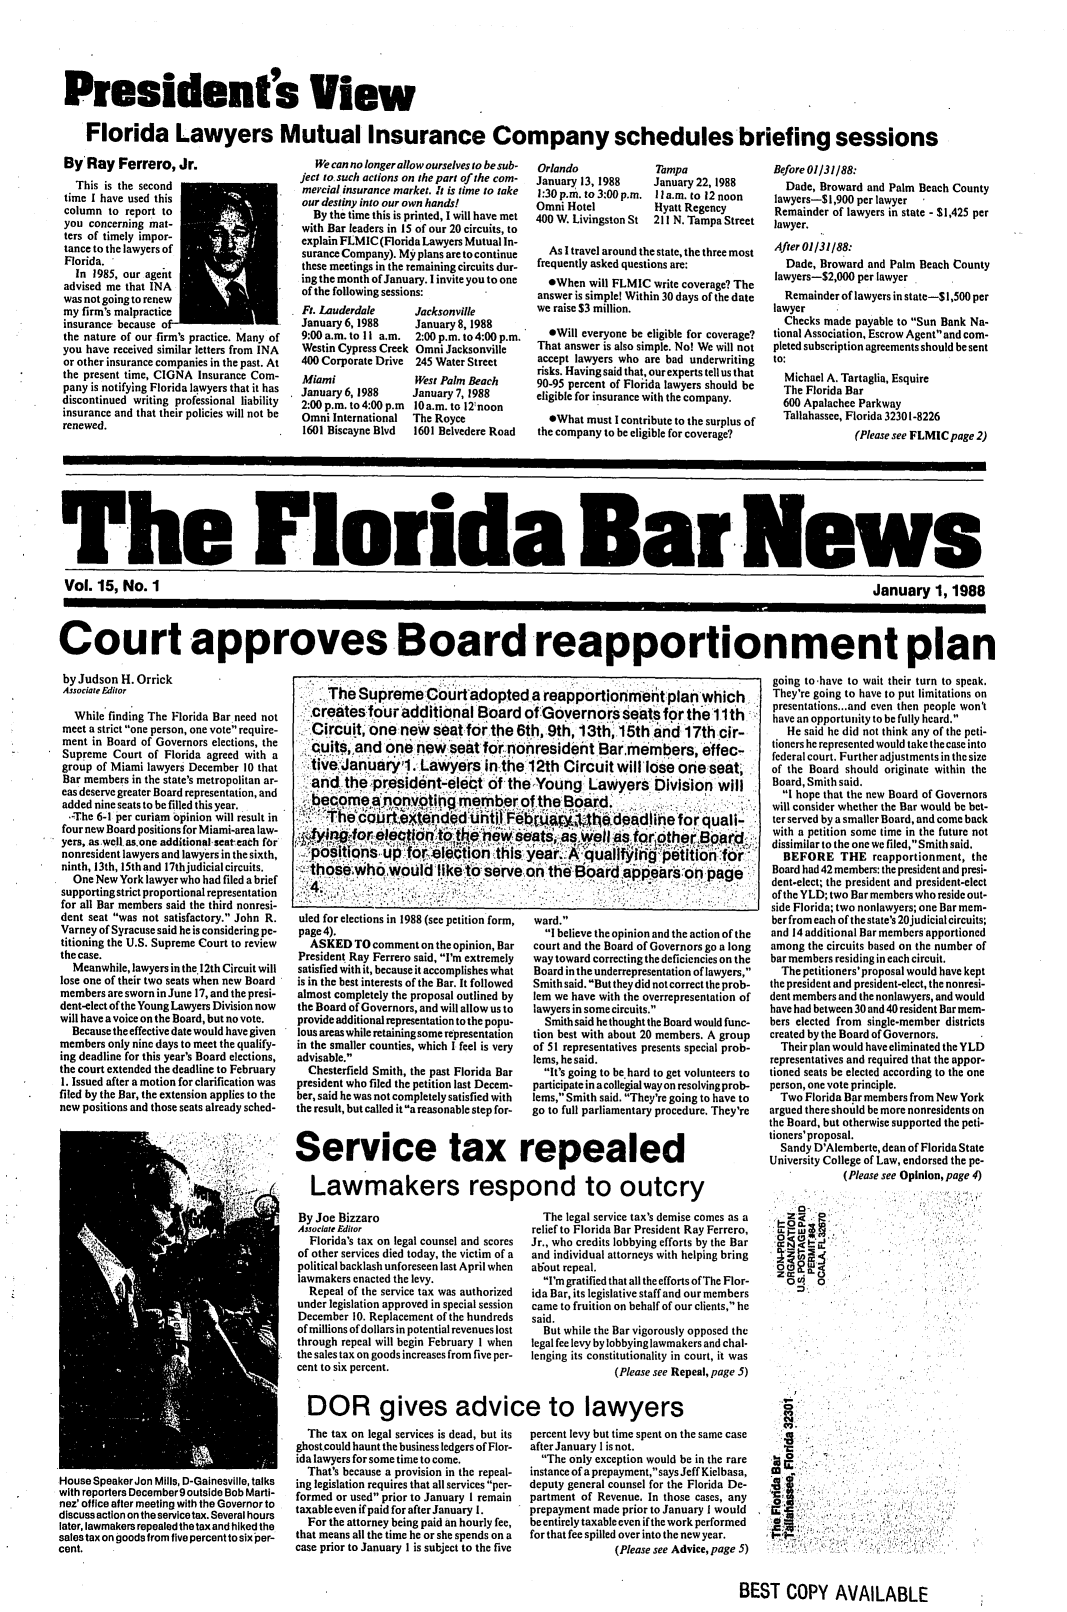 handle is hein.barjournals/flabn0015 and id is 1 raw text is: 





President's View

   Florida Lawyers Mutual Insurance Company schedules briefing sessions


ByRay Ferrero, Jr.
  This is the second
time I have used this
column to report to
you concerning mat-
ters of timely impor-
tance to the lawyers of
Florida.
  In 1985, our agent
advised me that INA
was not going to renew
my firm's malpractice
insurance because o
the nature of our firm's practice. Many of
you have received similar letters from INA
or other insurance companies in the past. At
the present time, CIGNA Insurance Com-
pany is notifying Florida lawyers that it has
discontinued writing professional liability
insurance and that their policies will not be
renewed.


   We can no longer allow ourselves to be sub-
ject to. such actions on the part of the com-
mercial insurance market. Jt is time to take
our destiny into our own hands!
  By the time this is printed, I will have met
with Bar leaders in 15 of our 20 circuits, to
explain F.MIC (Florida Lawyers Mutual In-
surance Company). My plans are to continue
these meetings in the remaining circuits dur-
ing the month of January. I invite you to one
of the following sessions:


Ft. Lauderdale
January 6, 1988
9:00 a.m. to II a.m.
Westin Cypress Creek
400 Corporate Drive
Miami
January 6, 1988
2:00 p.m. to 4:00 p.m
Omni International
1601 Biscayne Blvd


Jacksonville
January 8, 1988
2:00 p.m. to 4:00 p.m.
Omni Jacksonville
245 Water Street
West Palm Beach
January7, 1988
10a.m. to 12noon
The Royce
1601 Belvedere Road


Orlando
January 13, 1988
1:30 p.m. to 3:00 p.m.
Omni Hotel
400 W. Livingston St


Tampa
January 22, 1988
11a.m. to 12 noon
Hyatt Regency
211 N. Tampa Street


  As I travel around the state, the three most
frequently asked questions are:
  eWhen will FLMIC write coverage? The
answer is simple! Within 30 days of the date
we raise $3 million.

  *Will everyone be eligible for coverage?
That answer is also simple. No! We will not
accept lawyers who are bad underwriting
risks. Having said that, our experts tell us that
90-95 percent of Florida lawyers should be
eligible for insurance with the company.
  *What must I contribute to the surplus of
the company to be eligible for coverage?


Before 01131188:
  Dade, Broward and Palm Beach County
lawyers-$ 1,900 per lawyer
Remainder of lawyers in state - $1,425 per
lawyer.
After O113188:
  Dade, Broward and Palm Beach County
lawyers-S2,000 per lawyer
  Remainder of lawyers in state-$1,500 per
lawyer
  Checks made payable to Sun Bank Na-
tional Association, Escrow Agent and com-
pleted subscription agreements should be sent
to:
  Michael A. Tartaglia, Esquire
  The Florida Bar
  600 Apalachee Parkway
  Tallahassee, Florida 32301-8226
              (Please see FLMIC page 2)


The Florida Bar .News

Vol. 15, No. 1                                                                                                                             January 1, 1988




Court approves Board reapportionment plan


by Judson H. Orrick
Associate Editor


   While finding The Florida Bar need not
 meet a strict one person, one vote require-
 ment in Board of Governors elections, the
 Supreme Court of Florida agreed with a
 group of Miami lawyers December 10 that
 Bar members in the state's metropolitan ar-
 eas deserve greater Board representation, and
 added nine seats to be filled this year.
 -The 6-1 per curiam opinion will result in
 four new Board positions for Miami-area law-
 yers, as.well. as.one additional, seteach fbr
 nonresident lawyers and lawyers in the sixth,
 ninth, 13th, 15th and l7thjudicial circuits.
 One New York lawyer who had filed a brief
 supporting strict proportional representation
 for all Bar members said the third nonresi-
 dent seat was not satisfactory. John R.
 Varney of Syracuse said he is considering pe-
 titioning the U.S. Supreme Court to review
 the case.
 Meanwhile, lawyers in the.12th Circuit will
 lose one of their two seats when new Board
 members are sworn in June 17, and the presi-
 dent-elect of the Young Lawyers Division now
 will have a voice on the Board, but no vote.
 Because the effective date would have given
 members only nine days to meet the qualify-
 ing deadline for this year's Board elections,
 the court extended the deadline to February
 1. Issued after a motion for clarification was
filed by the Bar, the extension applies to the
new positions and those seats already sched-


uled for elections in 1988 (see petition form,
page 4).
  ASKED TO comment on the opinion, Bar
President. Ray Ferrero said, I'm extremely
satisfied with it, because it accomplishes what
is in the best interests of the Bar. It followed
almost completely the proposal outlined by
the Board of Governors, and will allow us to
provide additional representation to the popu-
lous areas while retaining some representation
in the smaller counties, which I feel is very
advisable.
  Chesterfield Smith, the past Florida Bar
president who filed the petition last Decem-
ber, said he was not completely satisfied with
the result, but called it a reasonable step for-


ward.
  I believe the opinion and the action of the
court and the Board of Governors go a long
way toward correcting the deficiencies on the
Board in the underrepresentation of lawyers,
Smith said. But they did not correct the prob-
lem we have with the overrepresentation of
lawyers in some circuits.
  Smith said he thought the Board would func-
tion best with about 20 members. A group
of 51 representatives presents special prob-
lems, he said.
  It's going to be.hard to get volunteers to
participate in a collegial way on resolving prob-
lems, Smith said. They're going to have to
go to full parliamentary procedure. They're


Service tax repealed

   Lawmakers respond to outcry


going to-have to wait their turn to speak.
They're going to have to put limitations on
presentations...and even then people won't
have an opportunity to be fully heard.
   He said he did not think any of the peti-
tioners he represented would take the case into
federal court. Further adjustments in the size
of the Board should originate within the
Board, Smith said.
  I hope that the new Board of Governors
  will consider whether the Bar would be bet-
  ter served by a smaller Board, and come back
  with a petition some time in the future not
dissimilar to the one we filed, Smith said.
  BEFORE THE reapportionment, the
  Board had 42 members: the president and presi-
dent-elect; the president and president-elect
of the YLD; two Bar members who reside out-
side Florida; two nonlawyers; one Bar mem-
ber from each of the state's 20judicial circuits;
and 14 additional Bar members apportioned
among the circuits based on the number of
bar members residing in each circuit.
  The petitioners' proposal would have kept
the president and president-elect, the nonresi-
dent members and the nonlawyers, and would
have had between 30 and 40 resident Bar mem-
bers elected from single-member districts
created by the Board of Governors.
  Their plan would have eliminated the YLD
representatives and required that the appor-
tioned seats be elected according to the one
person, one vote principle.
  Two Florida Bar members from New York
argued there should be more nonresidents on
the Board, but otherwise supported the peti-
tioners' proposal.
  Sandy D'Alemberte, dean of Florida State
University College of Law, endorsed the pe-
             (Please see Opinion, page 4)


House SpeakerJon Mills, D-Gainesville, talks
with reporters December 9 outside Bob Marti-
nez' office after meeting with the Governor to
discuss action on the servicetax. Several hours
later, lawmakers repealed the tax and hiked the
sales tax on goods from five percent to six per-
cent.


By Joe Bizzaro
Associate Editor
  Florida's tax on legal counsel and scores
of other services died today, the victim of a
political backlash unforeseen last April when
lawmakers enacted the levy.
  Repeal of the service tax was authorized
under legislation approved in special session
December 10. Replacement of the hundreds
of millions of dollars in potential revenues lost
through repeal will begin February I when
the sales tax on goods increases from five per-
cent to six percent.


  The tax on legal services is dead, but its
ghost could haunt the business ledgers of Flor-
ida lawyers for some time to come.
  That's because a provision in the repeal-
ing legislation requires that all services per-
formed or used prior to January I remain
taxable even if paid for after January 1.
  For the attorney being paid an hourly fee,
that means all the time he or she spends on a
case prior to January 1 is subject to the five


  The legal service tax's demise comes as a
relief to Florida Bar President Ray Ferrero,
Jr., who credits lobbying efforts by the Bar
and individual attorneys with helping bring
about repeal.
  I'm gratified that all the efforts of The Flor-
ida Bar, its legislative staff and our members
came to fruition on behalf of our clients, he
said.
  But while the Bar vigorously opposed the
legal fee levy by lobbying lawmakers and chal-
lenging its constitutionality in court, it was
              (Please see Repeal, page 5)


percent levy but time spent on the same case
after January I is not.
  The only exception would be in the rare
instance of a prepayment, says Jeff Kielbasa,
deputy general counsel for the Florida De-
partment of Revenue. In those cases, any
prepayment made prior to January I would
be entirely taxable even if the work performed
for that fee spilled over into the new year.
               (Please see Advice, page 5)


BEST COPY AVAILABLE


    The Supreme:Courtadopted a reapportionmentplanwhich
 . ,createstfouradditional Board ofiGovernors seats for the l1th
   Circuitoenwsat.or sets tr he61t
   cuitne:n        -for the 6th, 9th, 13th 1ithand 17th cir-
   illcut ,and one neW.seat fornOnresident Barlmembers, effec-
i iJanuaryiLawyers in the 12th Circuit will lose oneseat;

  and ithe presidfnt-elec t ofthe-,Young' Lawyers Division will
  become a  nor  v  ime'  ber of the  oad.

    Th; ao' orune4d  uii .,       0(b 4Sidad ihefor  a'-
       .s Ut'                       ,ieasweIa             n      titofr
   ipslti ns ,.p.-oroledtion thifs.   'e A&~uI~r ptto  o
   t';ose . wul  ikeerve.o6 thtBar aperson page
   4


DOR gives advice to lawyers


00, 0


  I-
  C

  .3

        7
U-
I<,I            :4.'


